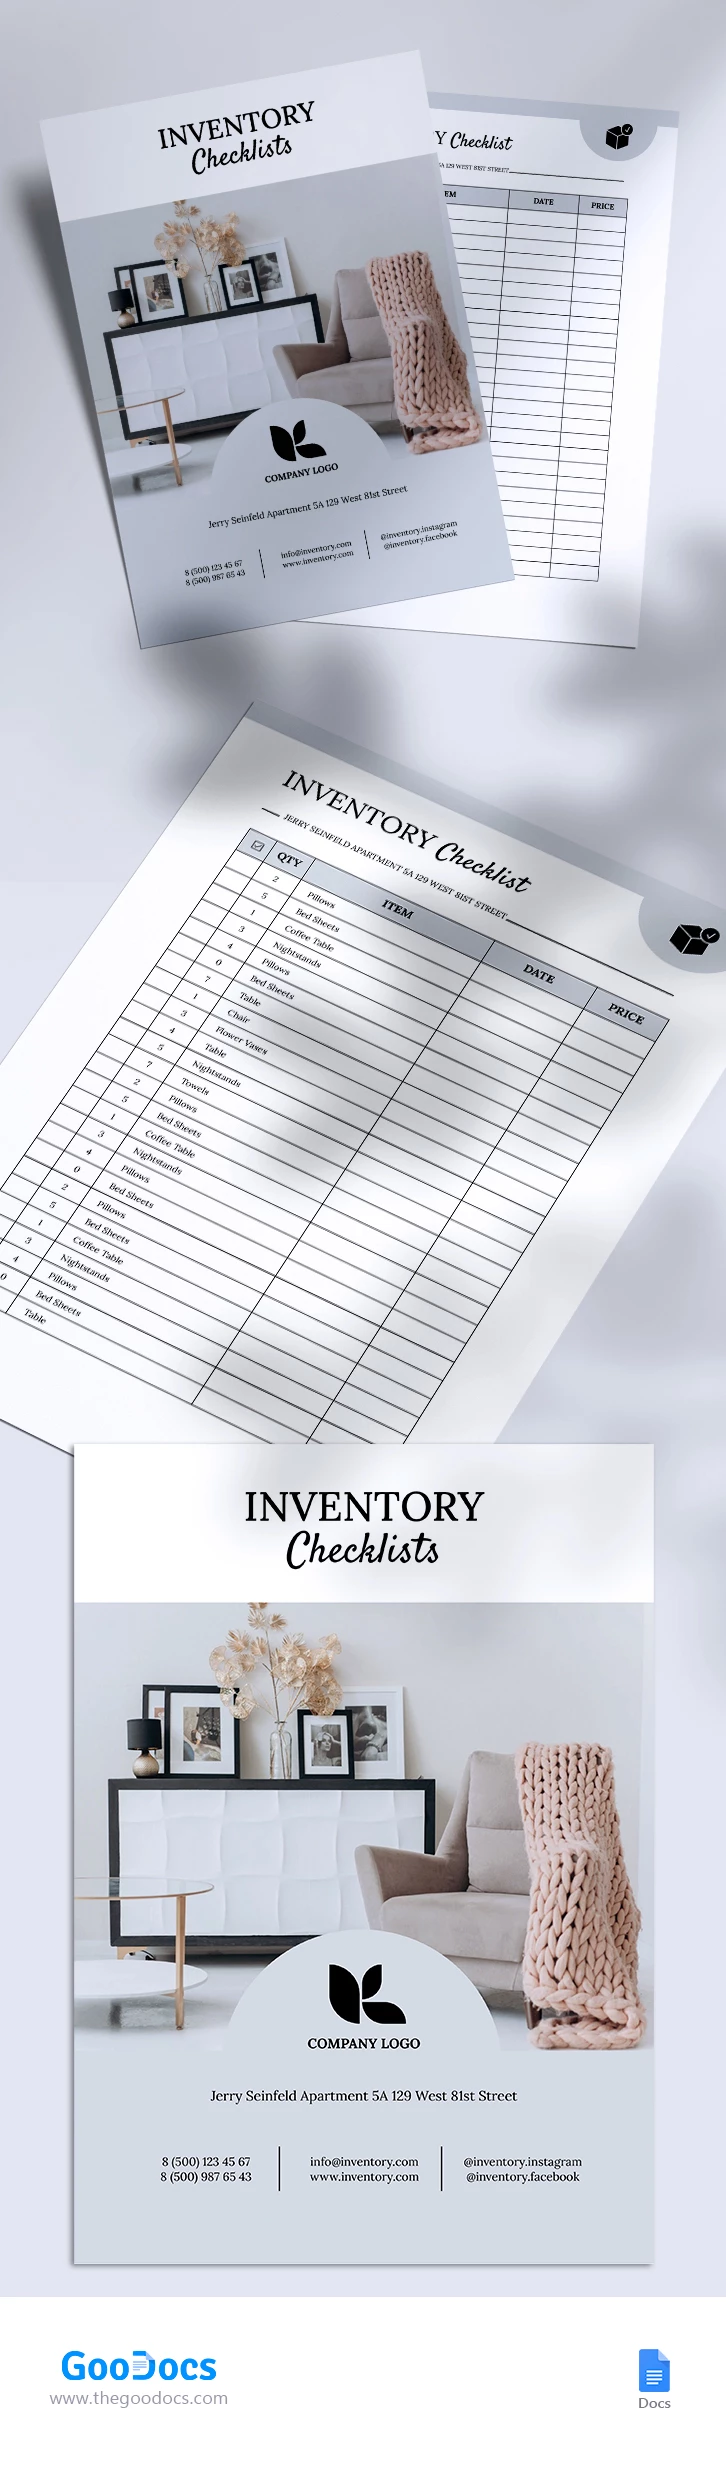 Inventory Checklists - free Google Docs Template - 10066671